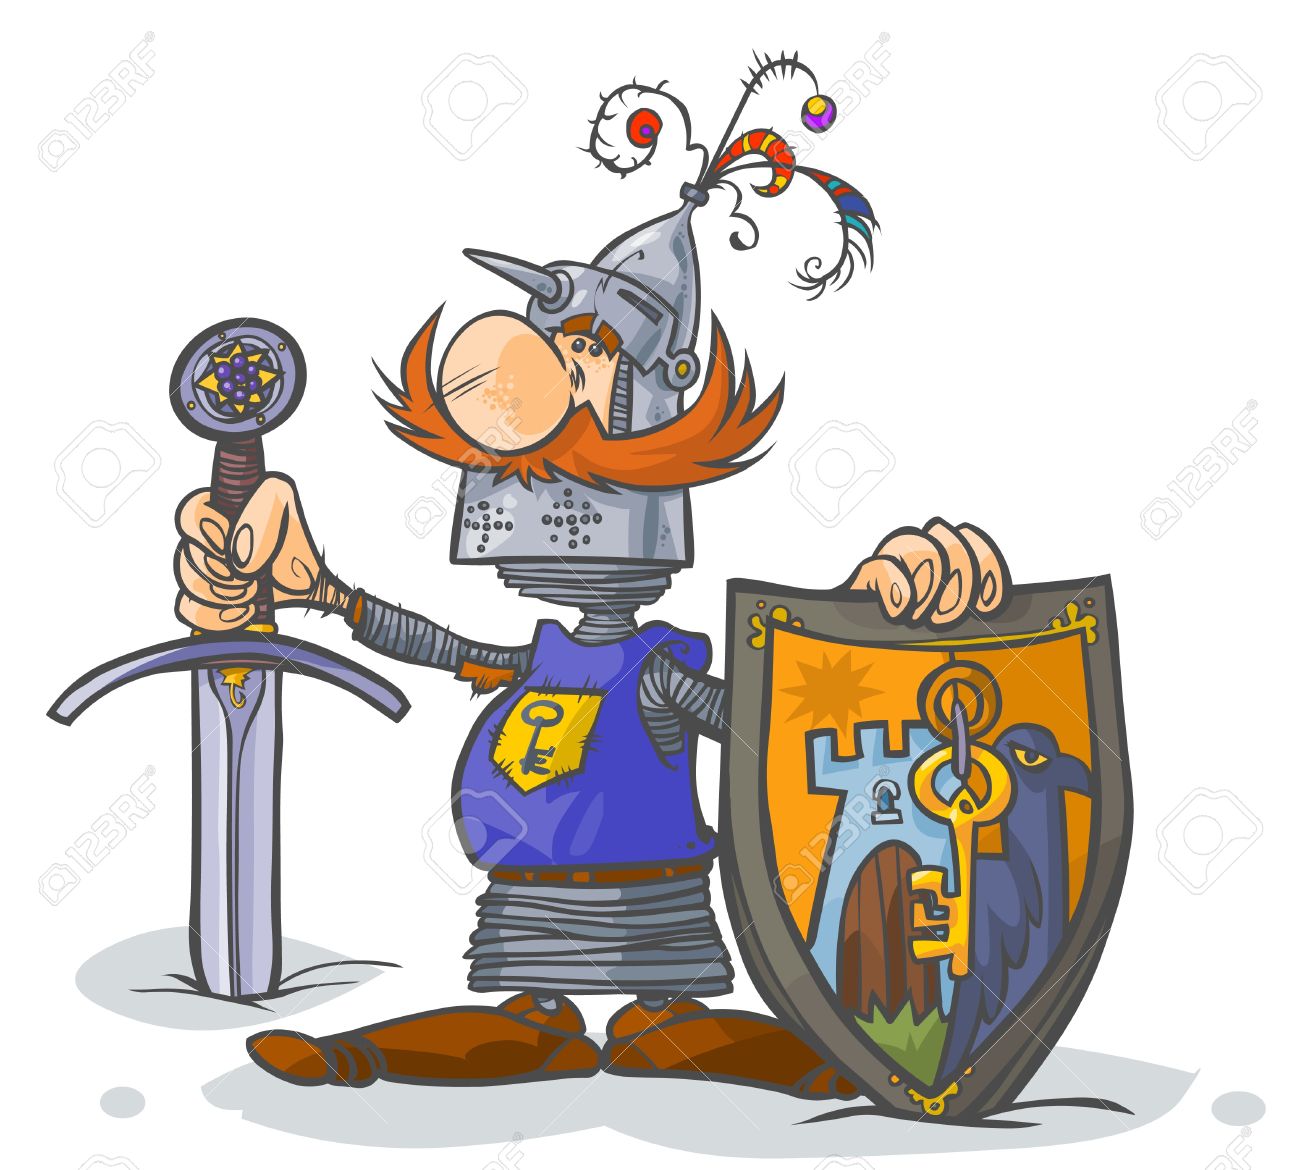 Chivalry clipart #13, Download drawings